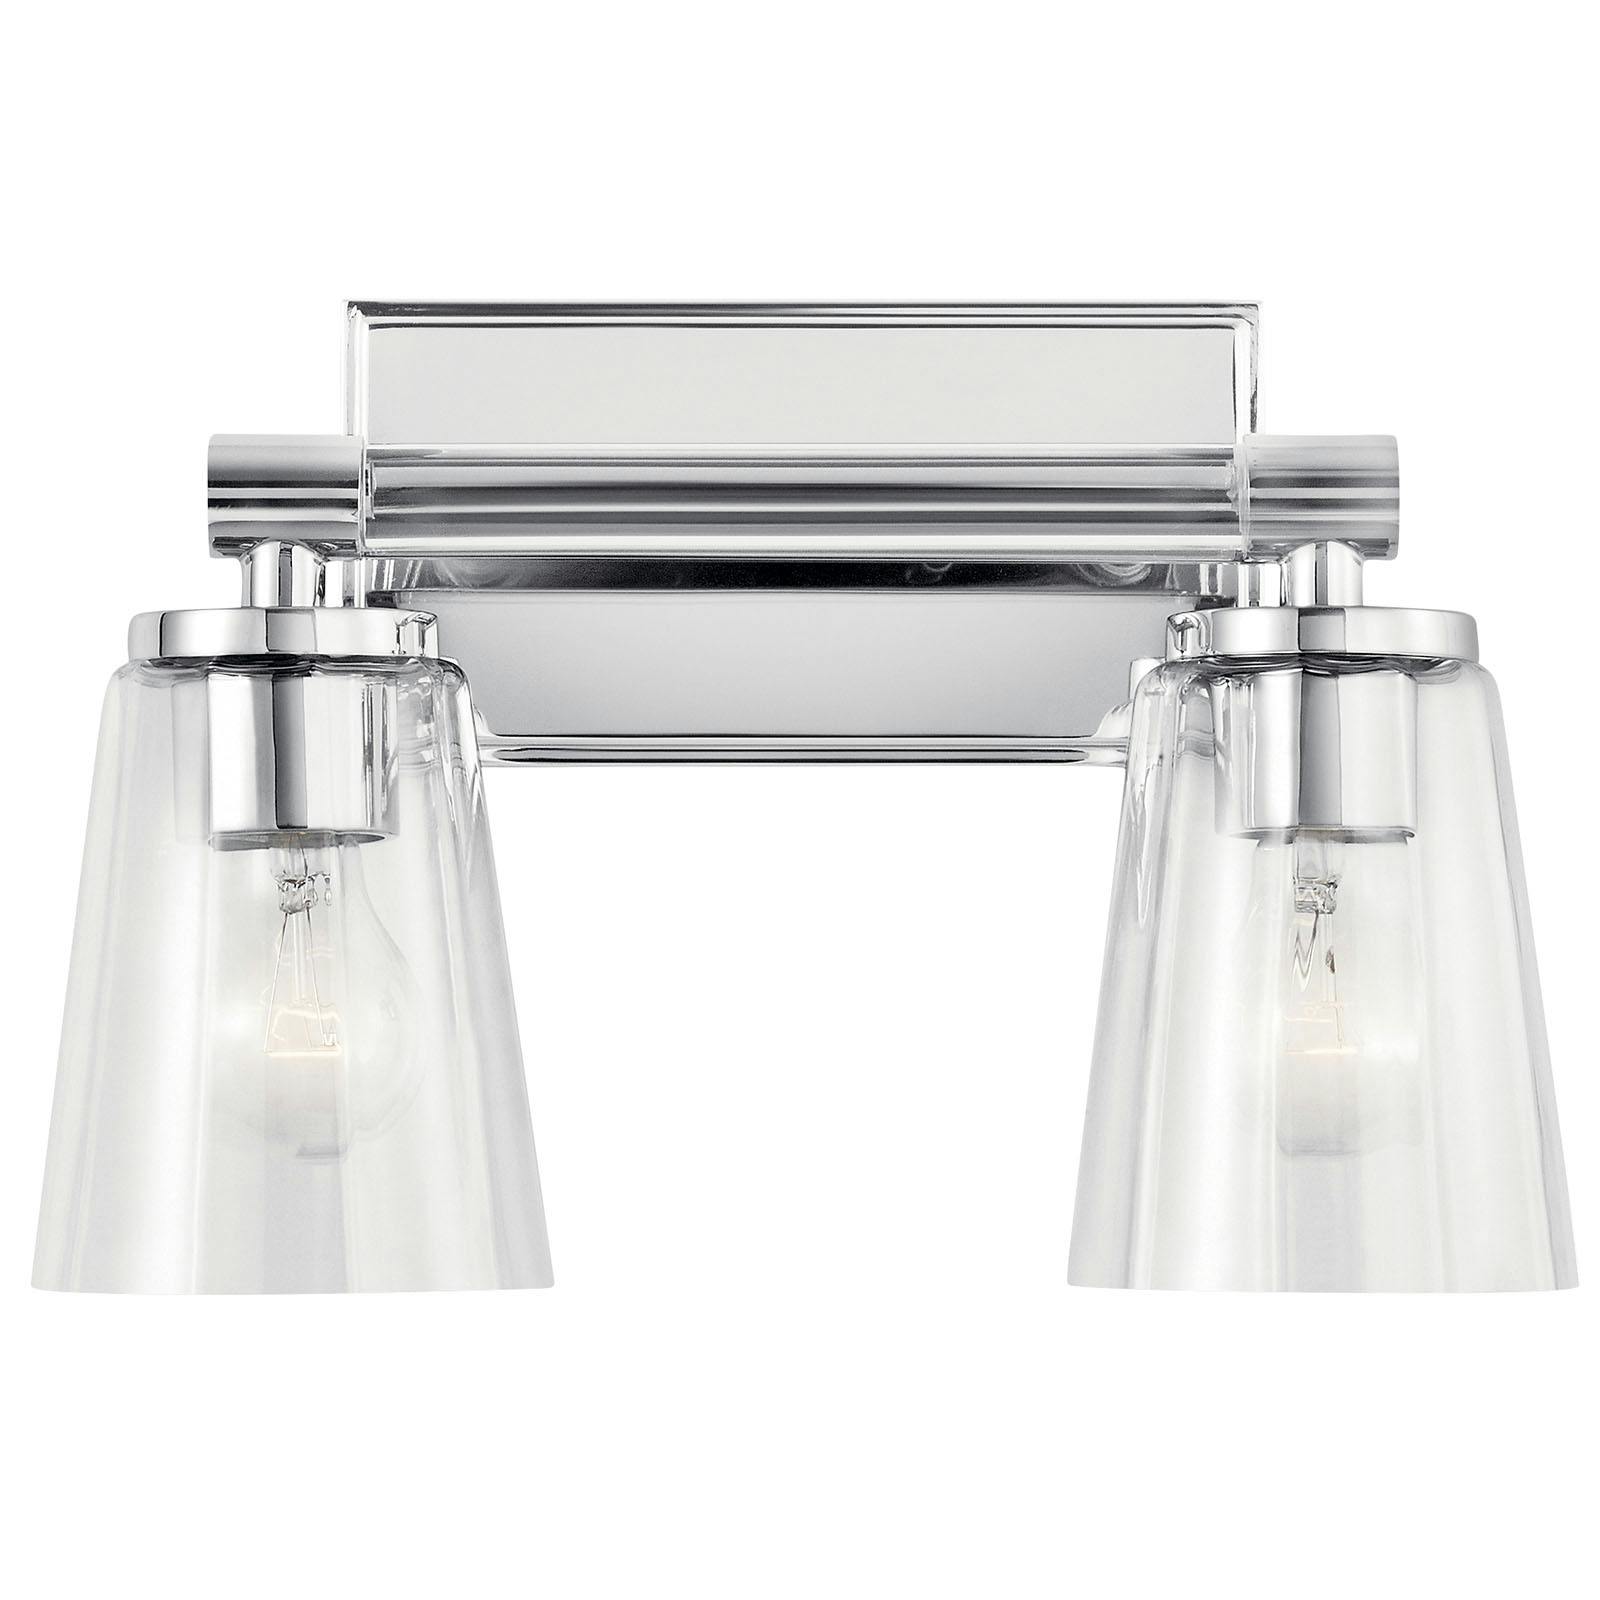 The Audrea™ 2 Light Vanity Light Chrome facing down on a white background